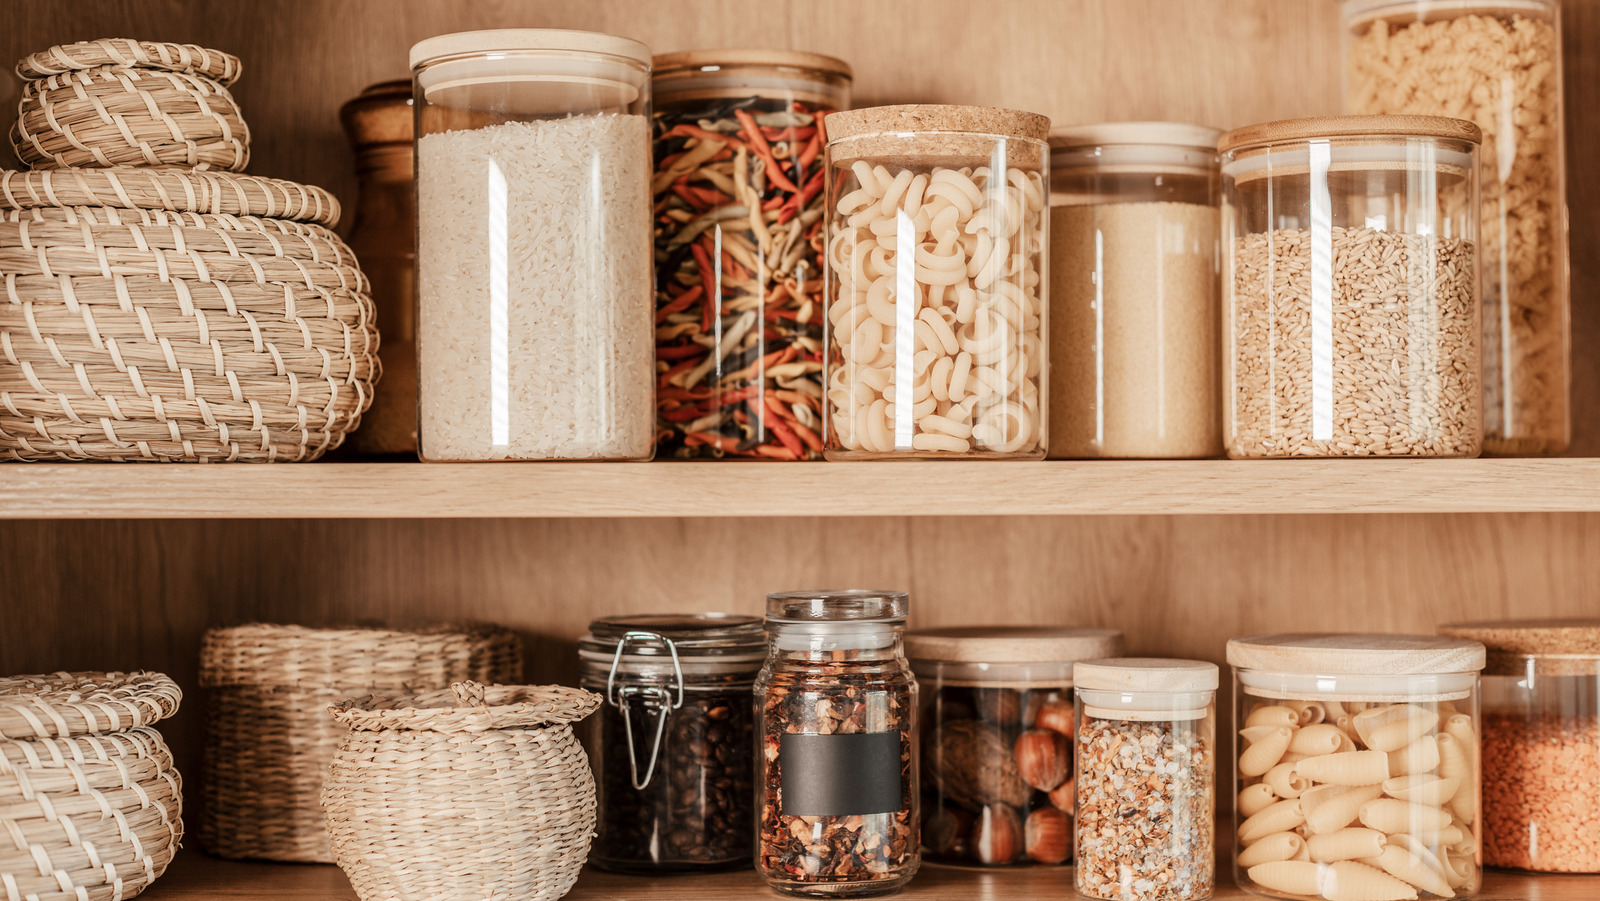 31 Ways to Maximize Your Pantry Space  Small pantry organization, Kitchen  organization pantry, Small pantry